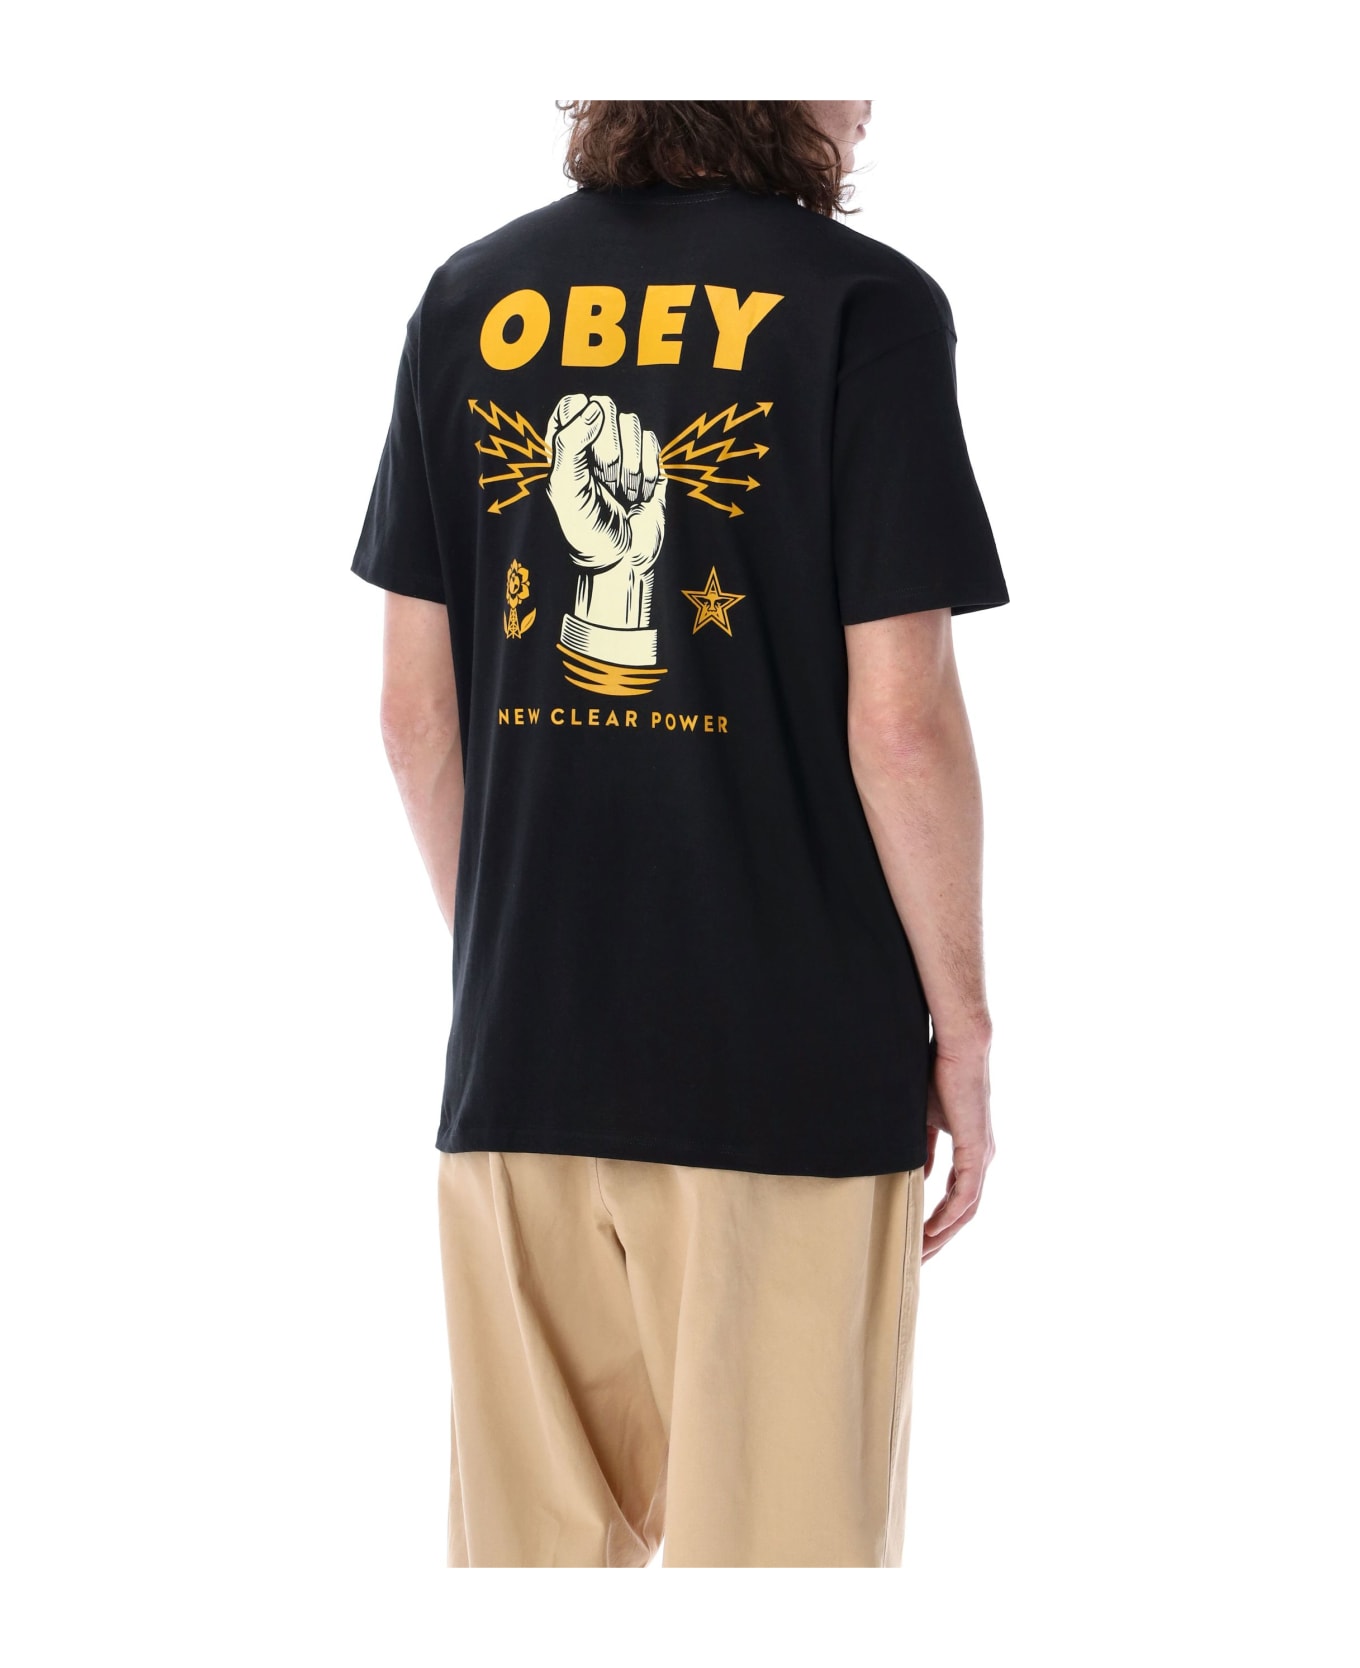 Obey New Clear Power T-shirt - BLACK シャツ